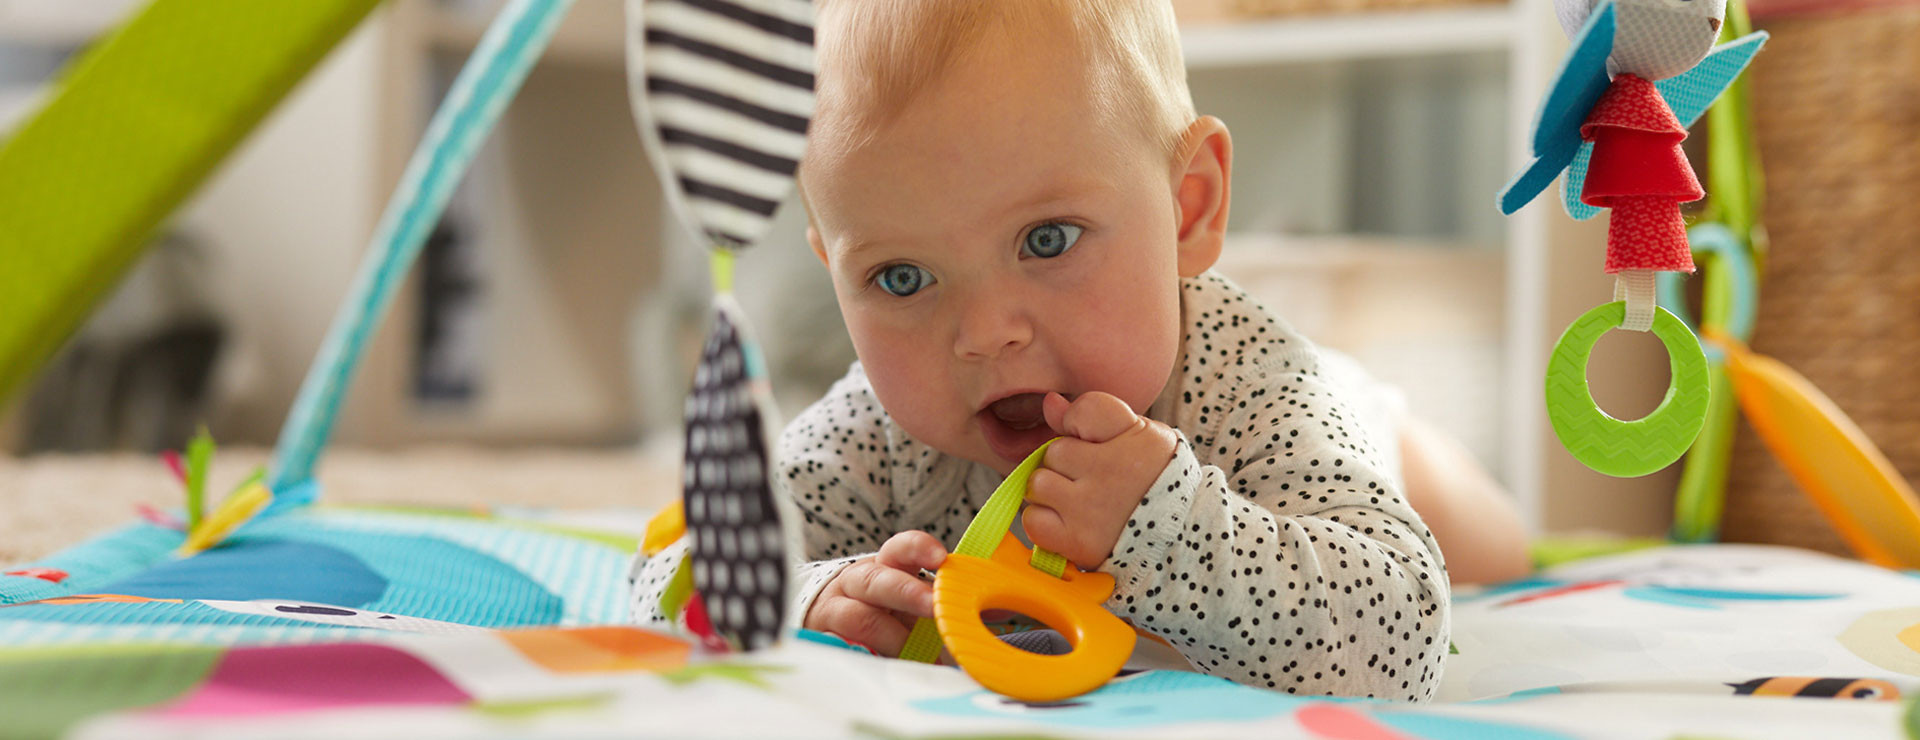 Geometric shaped toys and mat images stimulate baby’s vision